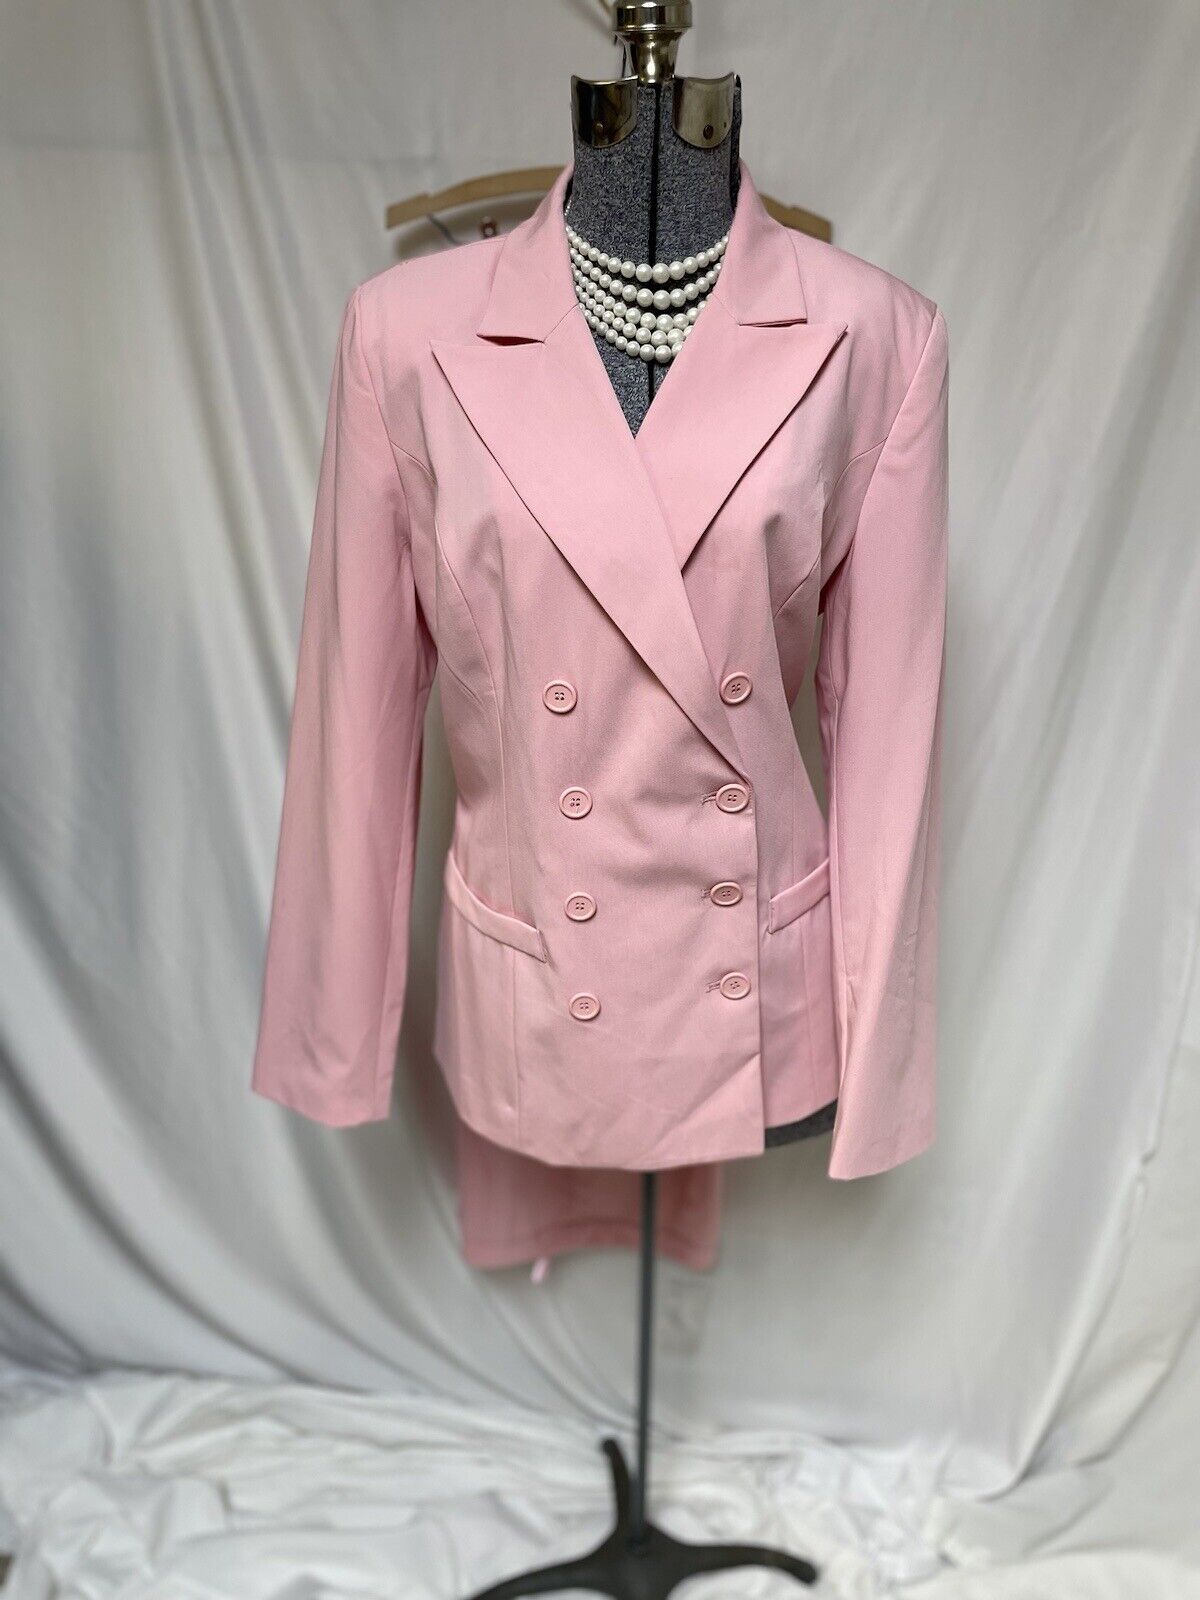 J G HOOK Pant Suit Size 14 NEW Two Piece Set 32X30.5 Pretty In Pink Pockets